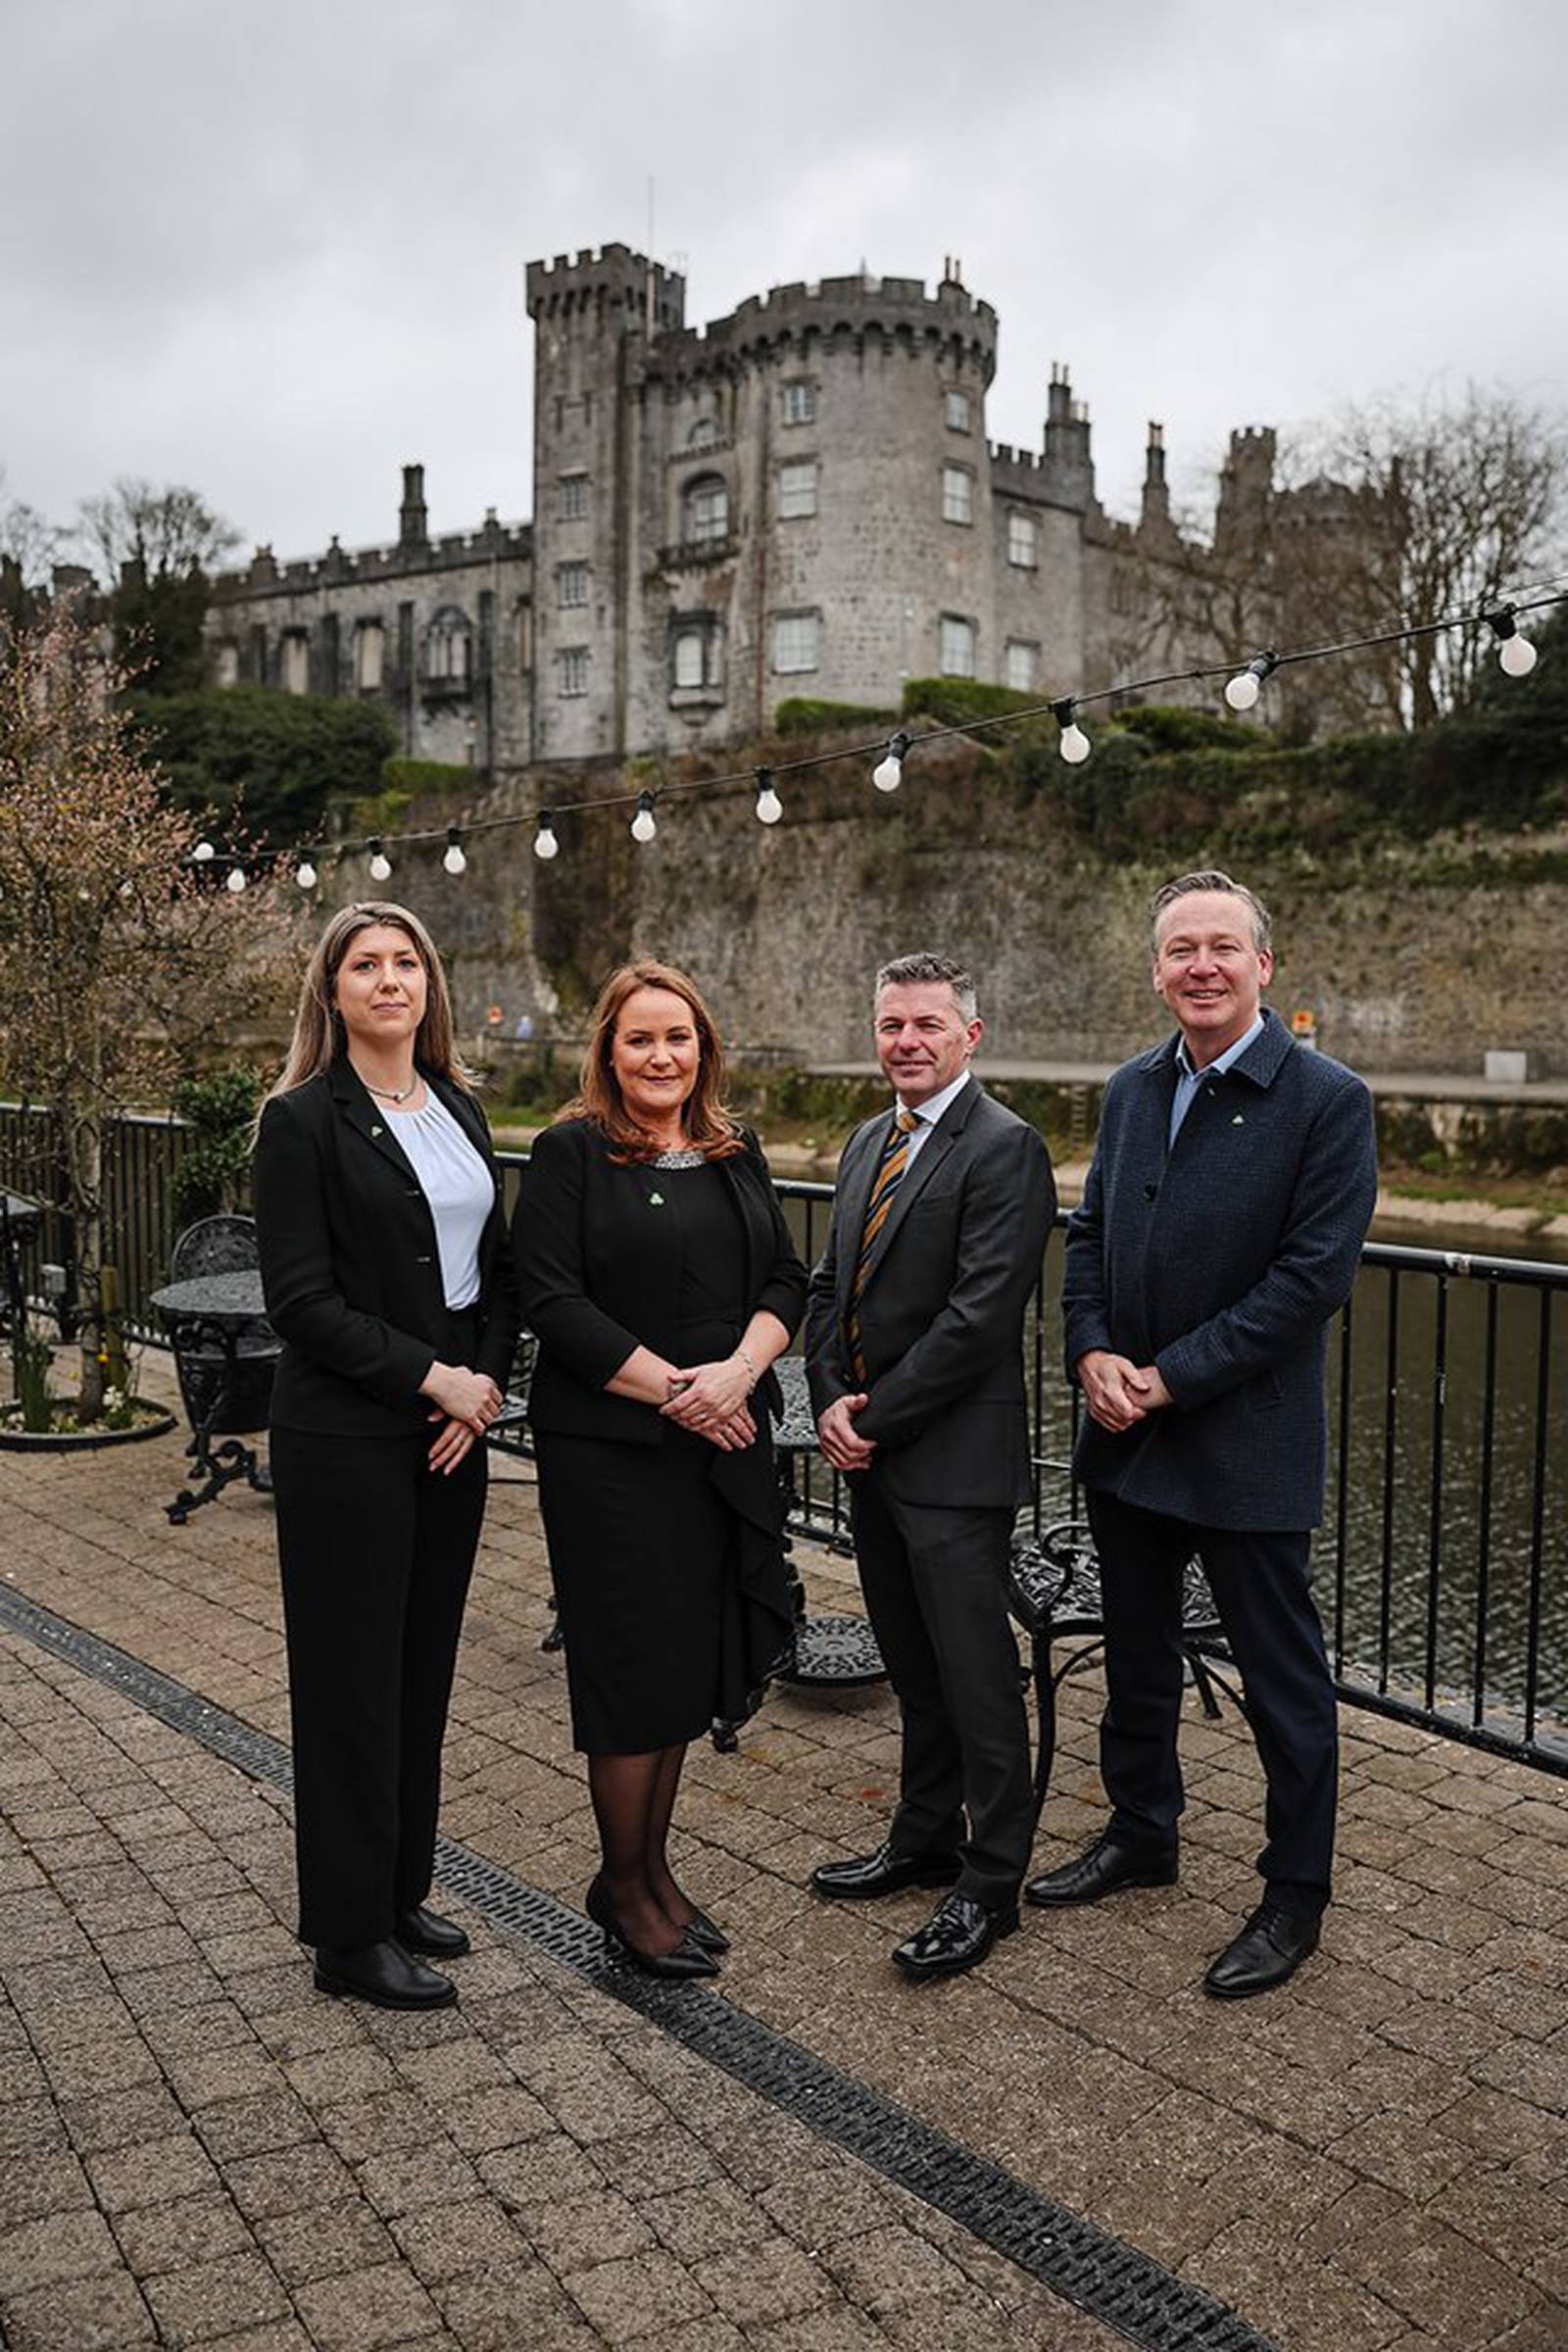 From left: Maria Gagic, project executive and Maeve McConnon department manager, IDA Ireland; Kevin Hogan, head of Ireland fund services and group head of private debt, Aztec Group; and Brian McGee, regional manager, IDA Ireland. Aztec Group announced its expansion into Ireland creating 30 jobs in Kilkenny.  Photograph: Nick O’Keeffe